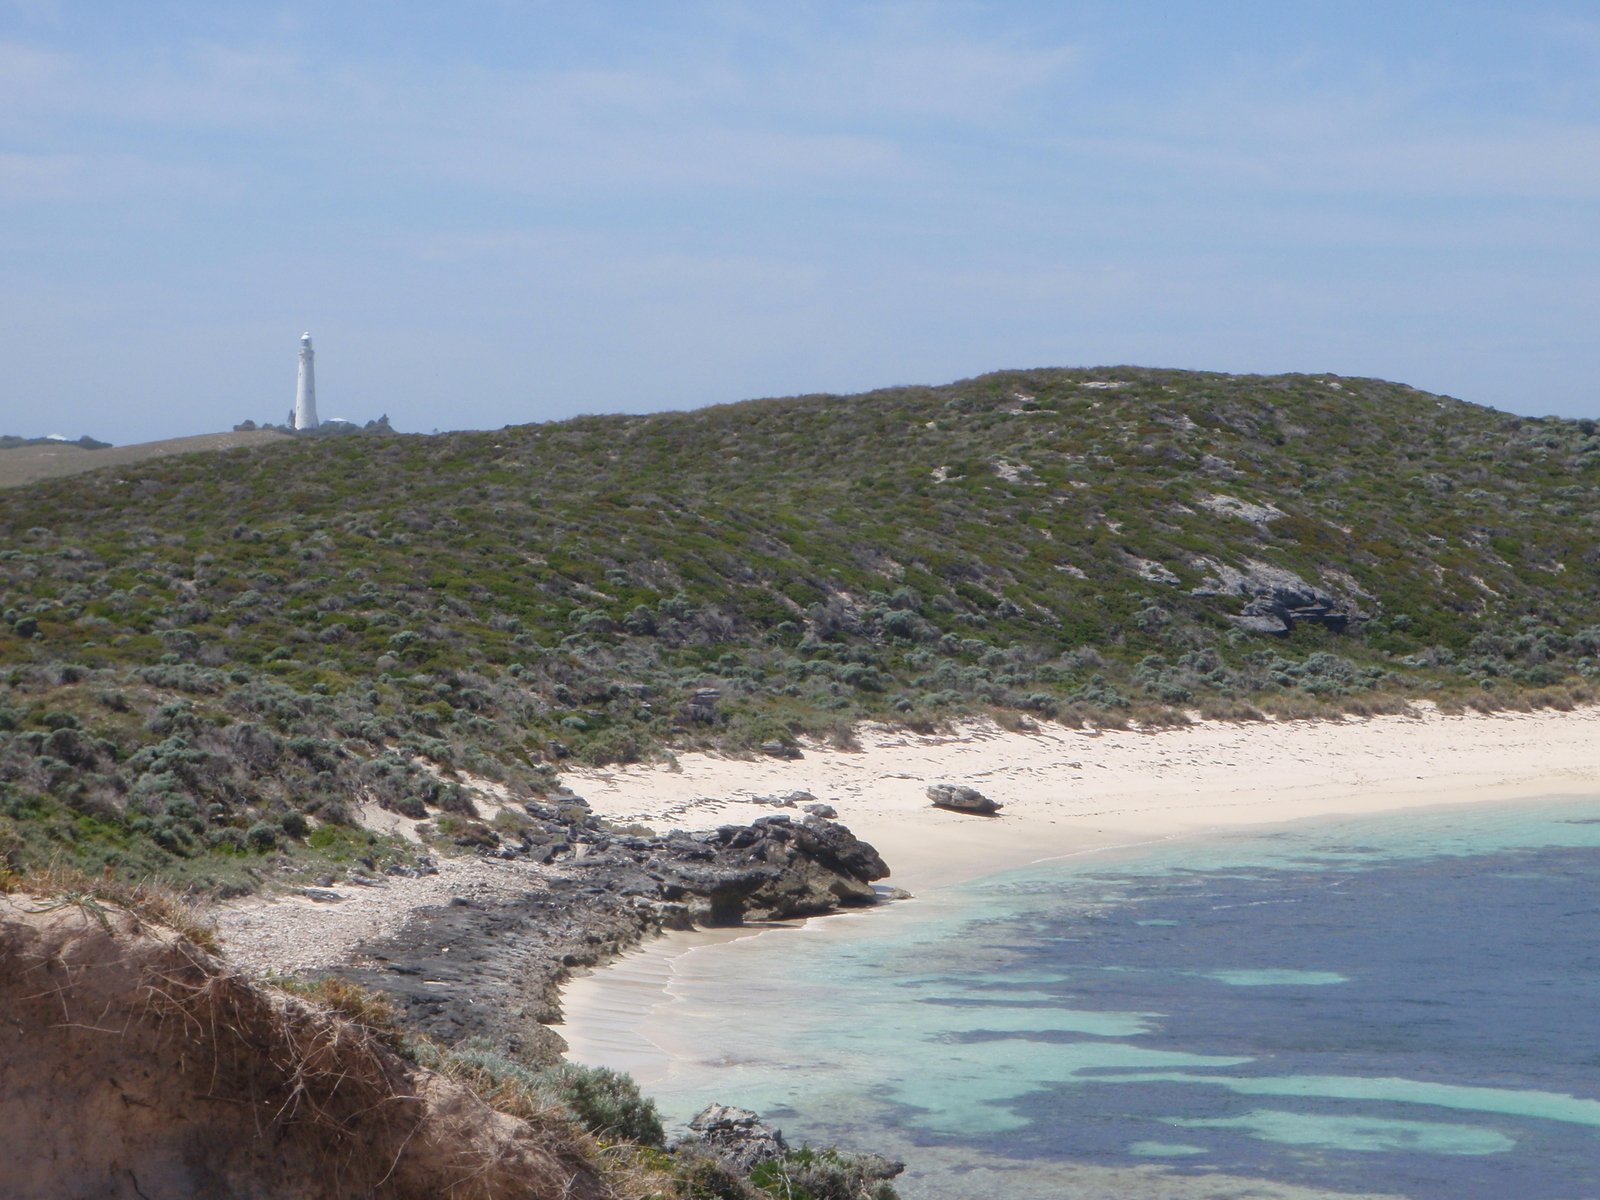 the landscape is beautiful and clear with a small white lighthouse in the distance